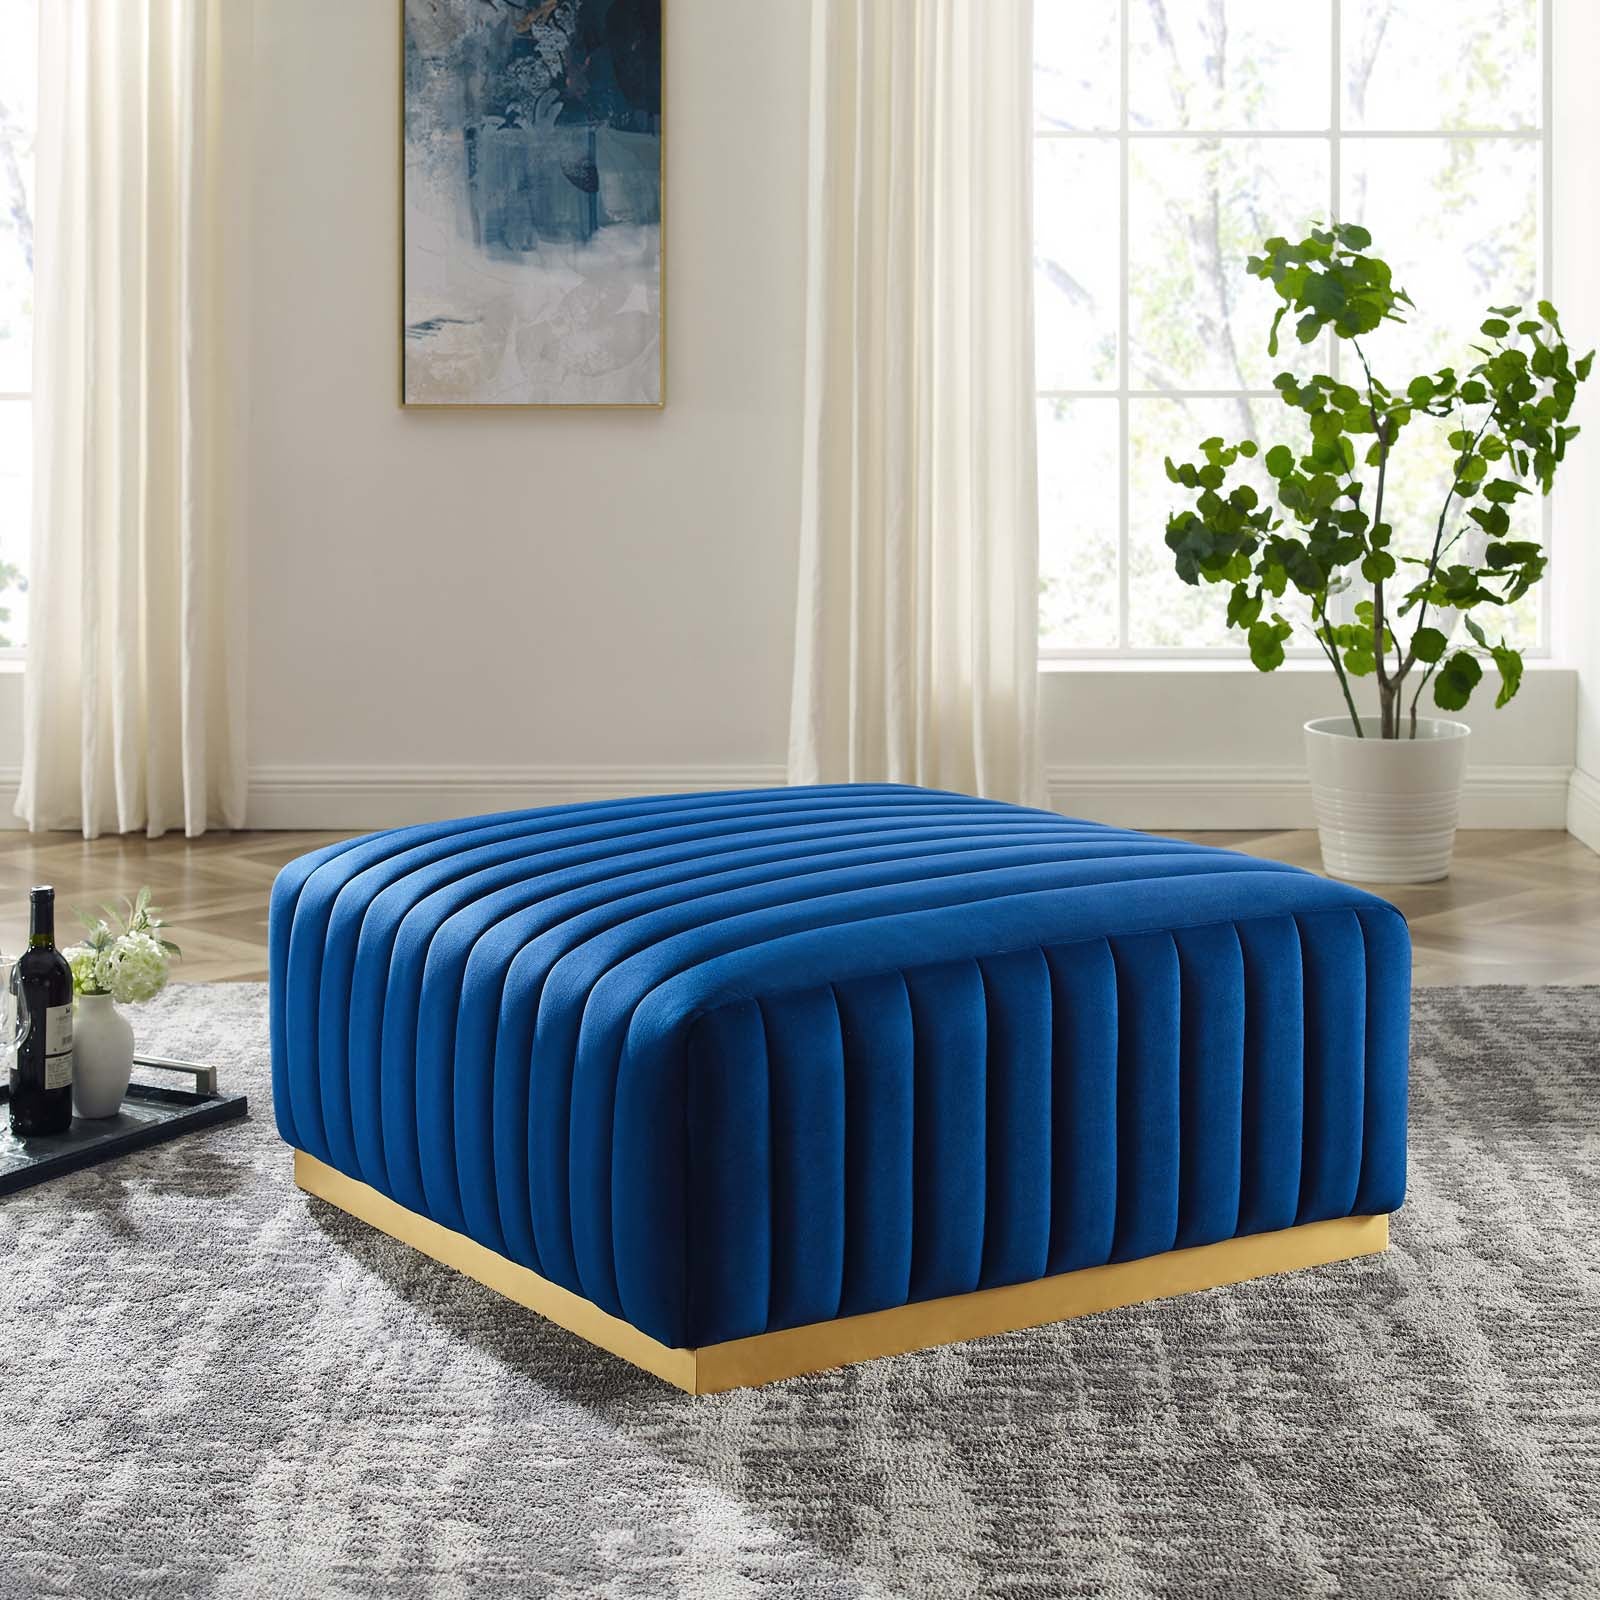 Modway Ottomans & Stools - Conjure Channel Tufted Performance Velvet Ottoman Gold Navy